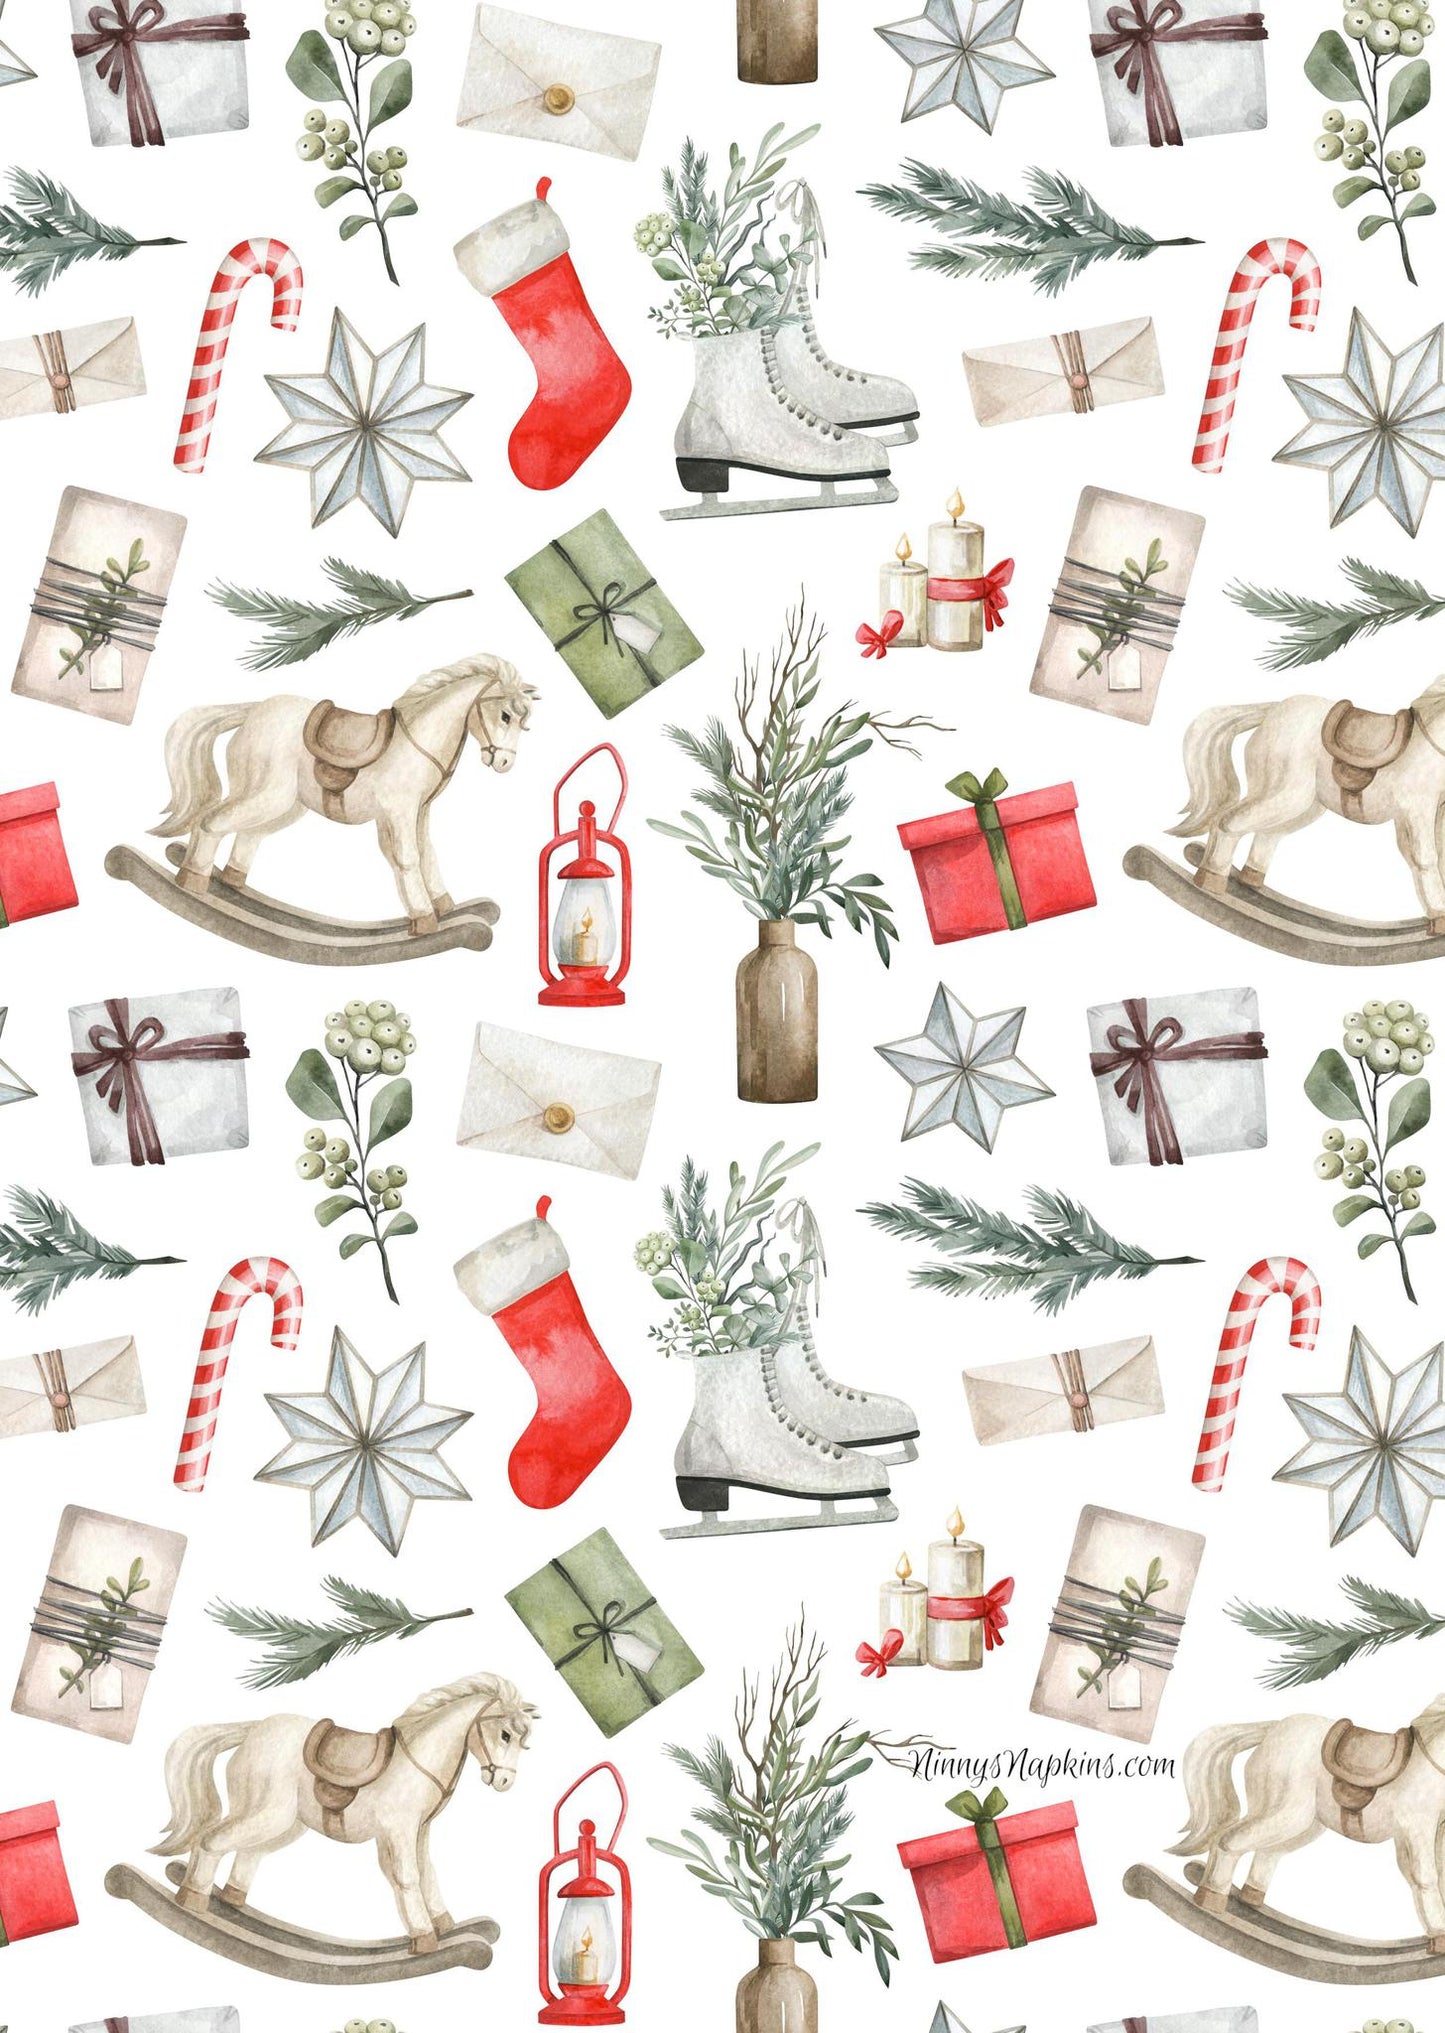 Ninny's Rice Paper A4 - Christmas Cheer